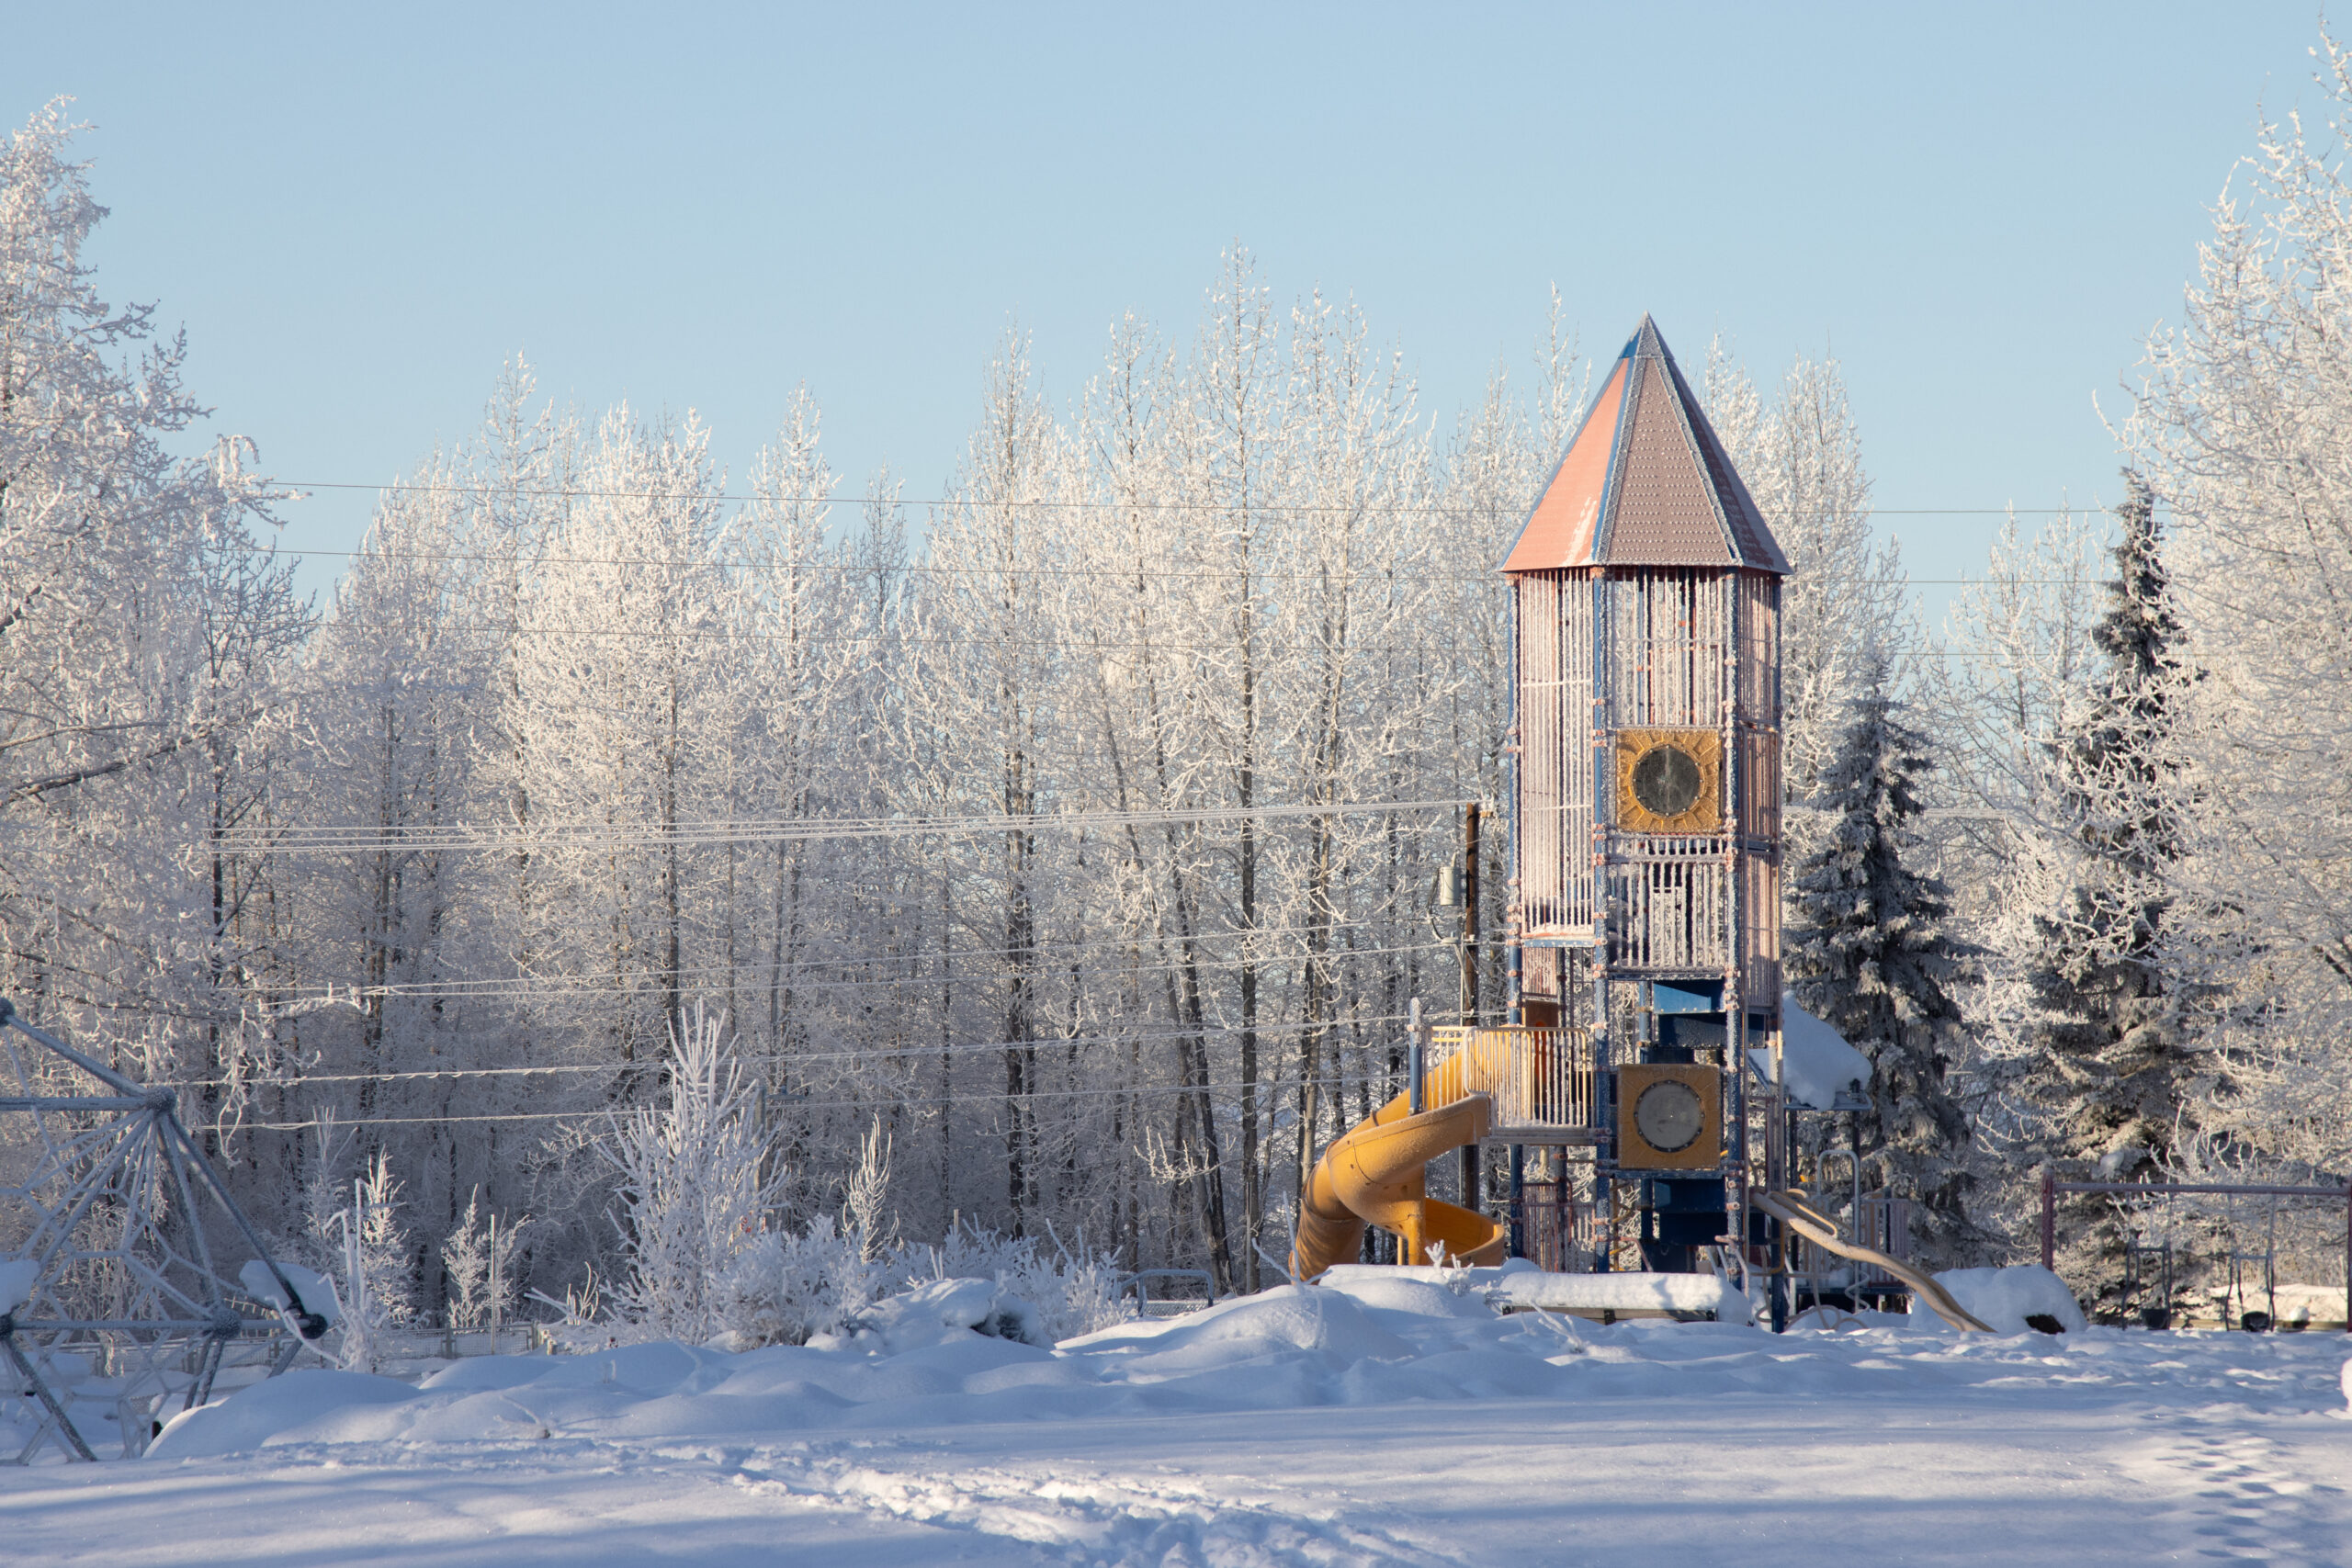 A children's playground covered in frost and surrounded by snow with sunlight shining on it.